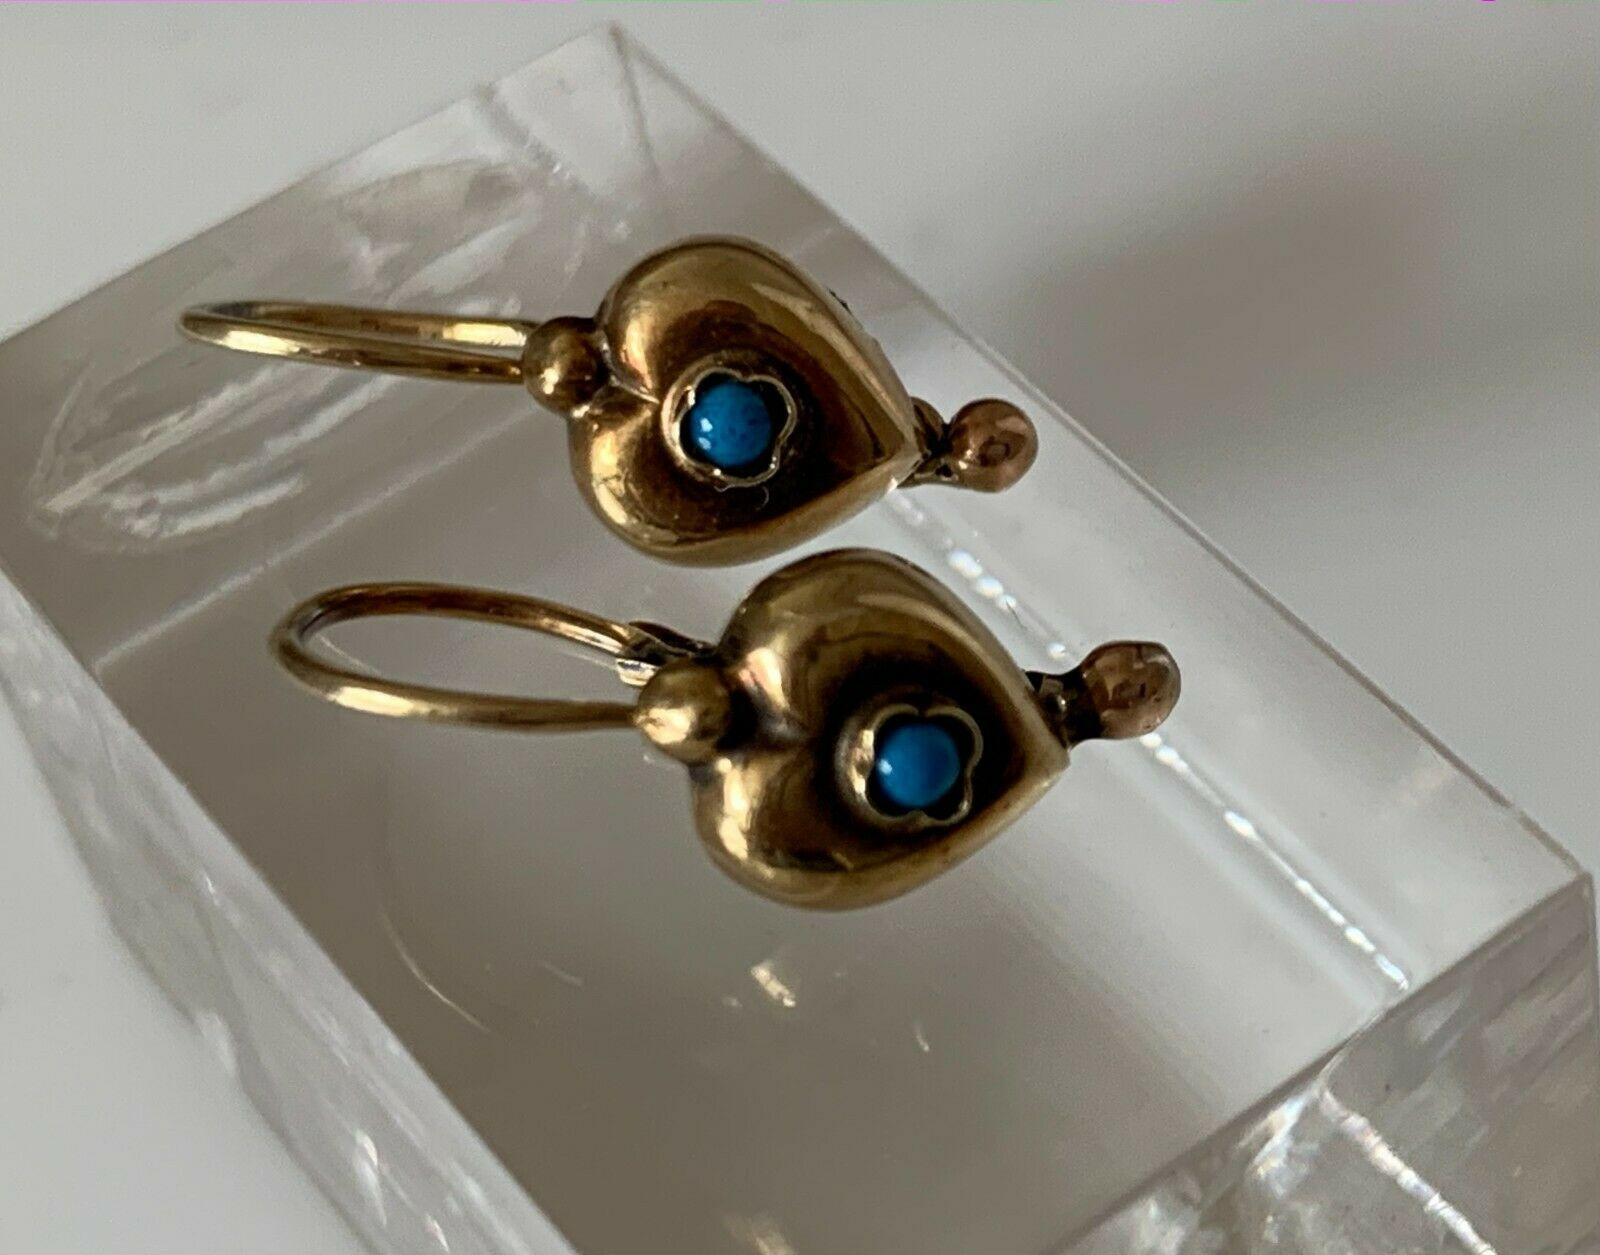 14ct 585 Gold Vintage Petite Earrings
** Central stones are a blue Colour with darker flecks visible- unknown ** 
Stamped 585 & an unknown makers mark 
Era 1920s-30s
The Heart measures 7mm x 7mm x 3mm approx
with a dangling 2mm ball ball .
Actual